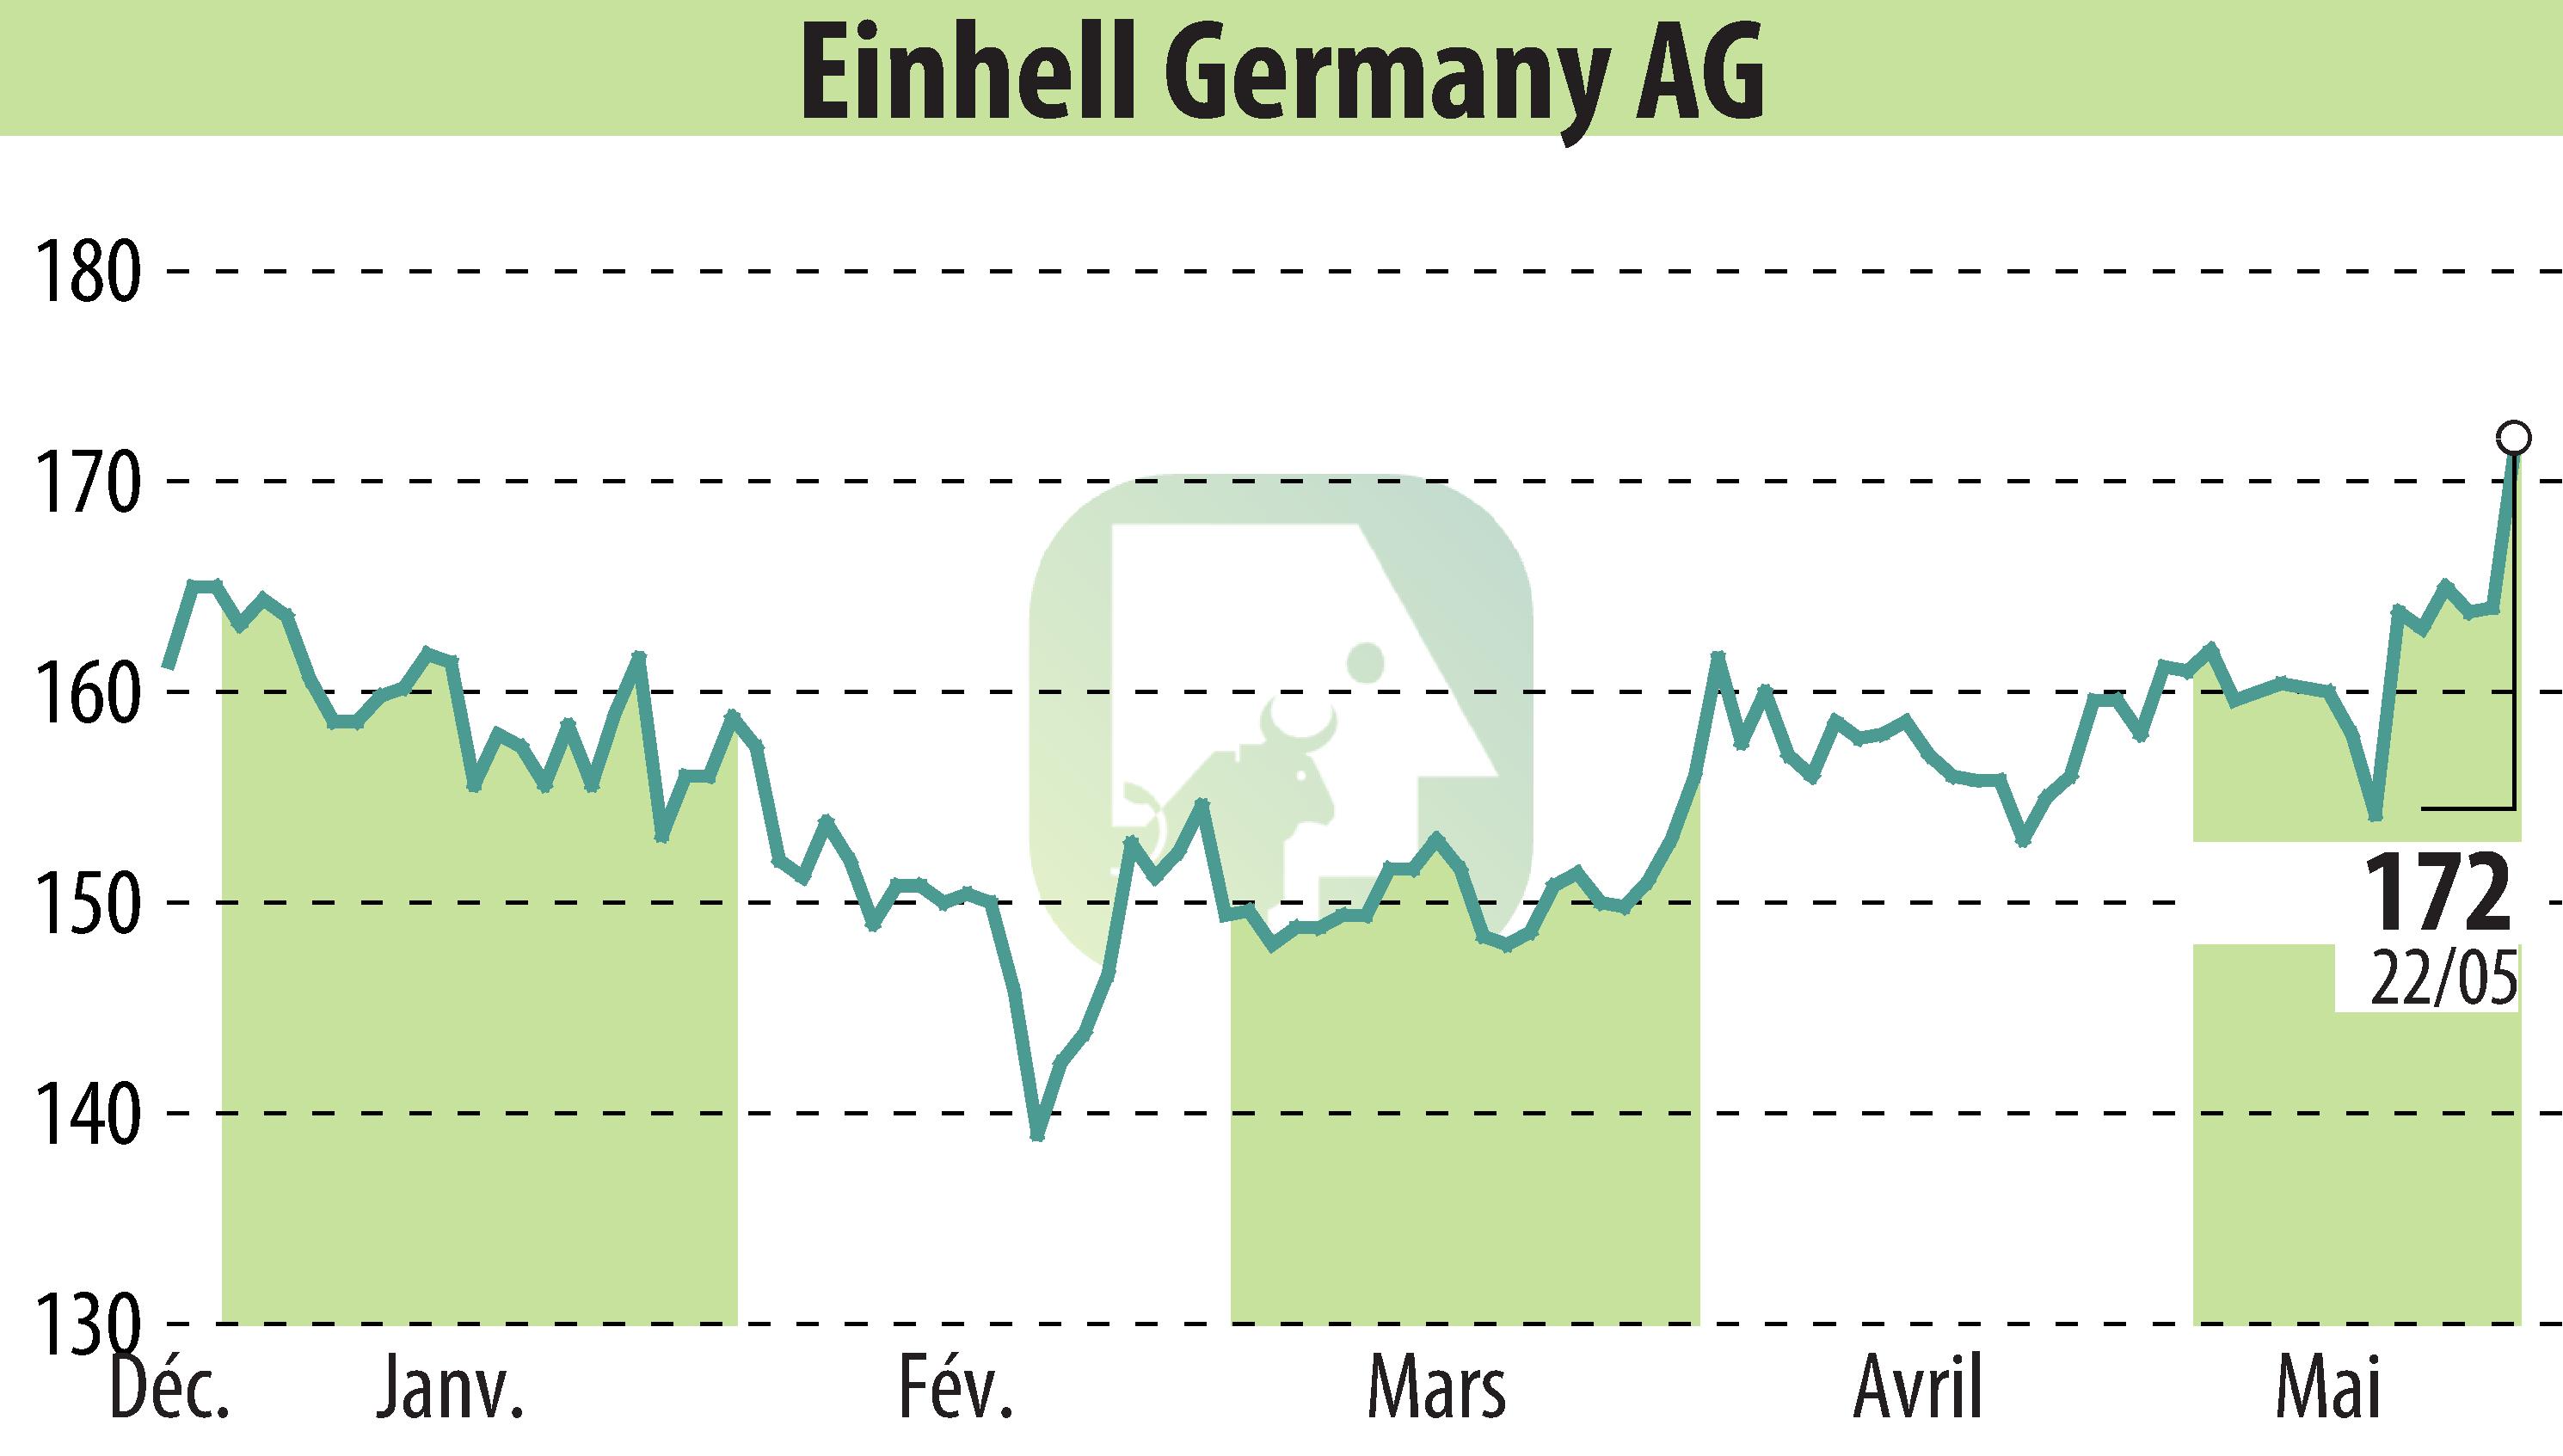 Stock price chart of Einhell Germany AG (EBR:EIN3) showing fluctuations.